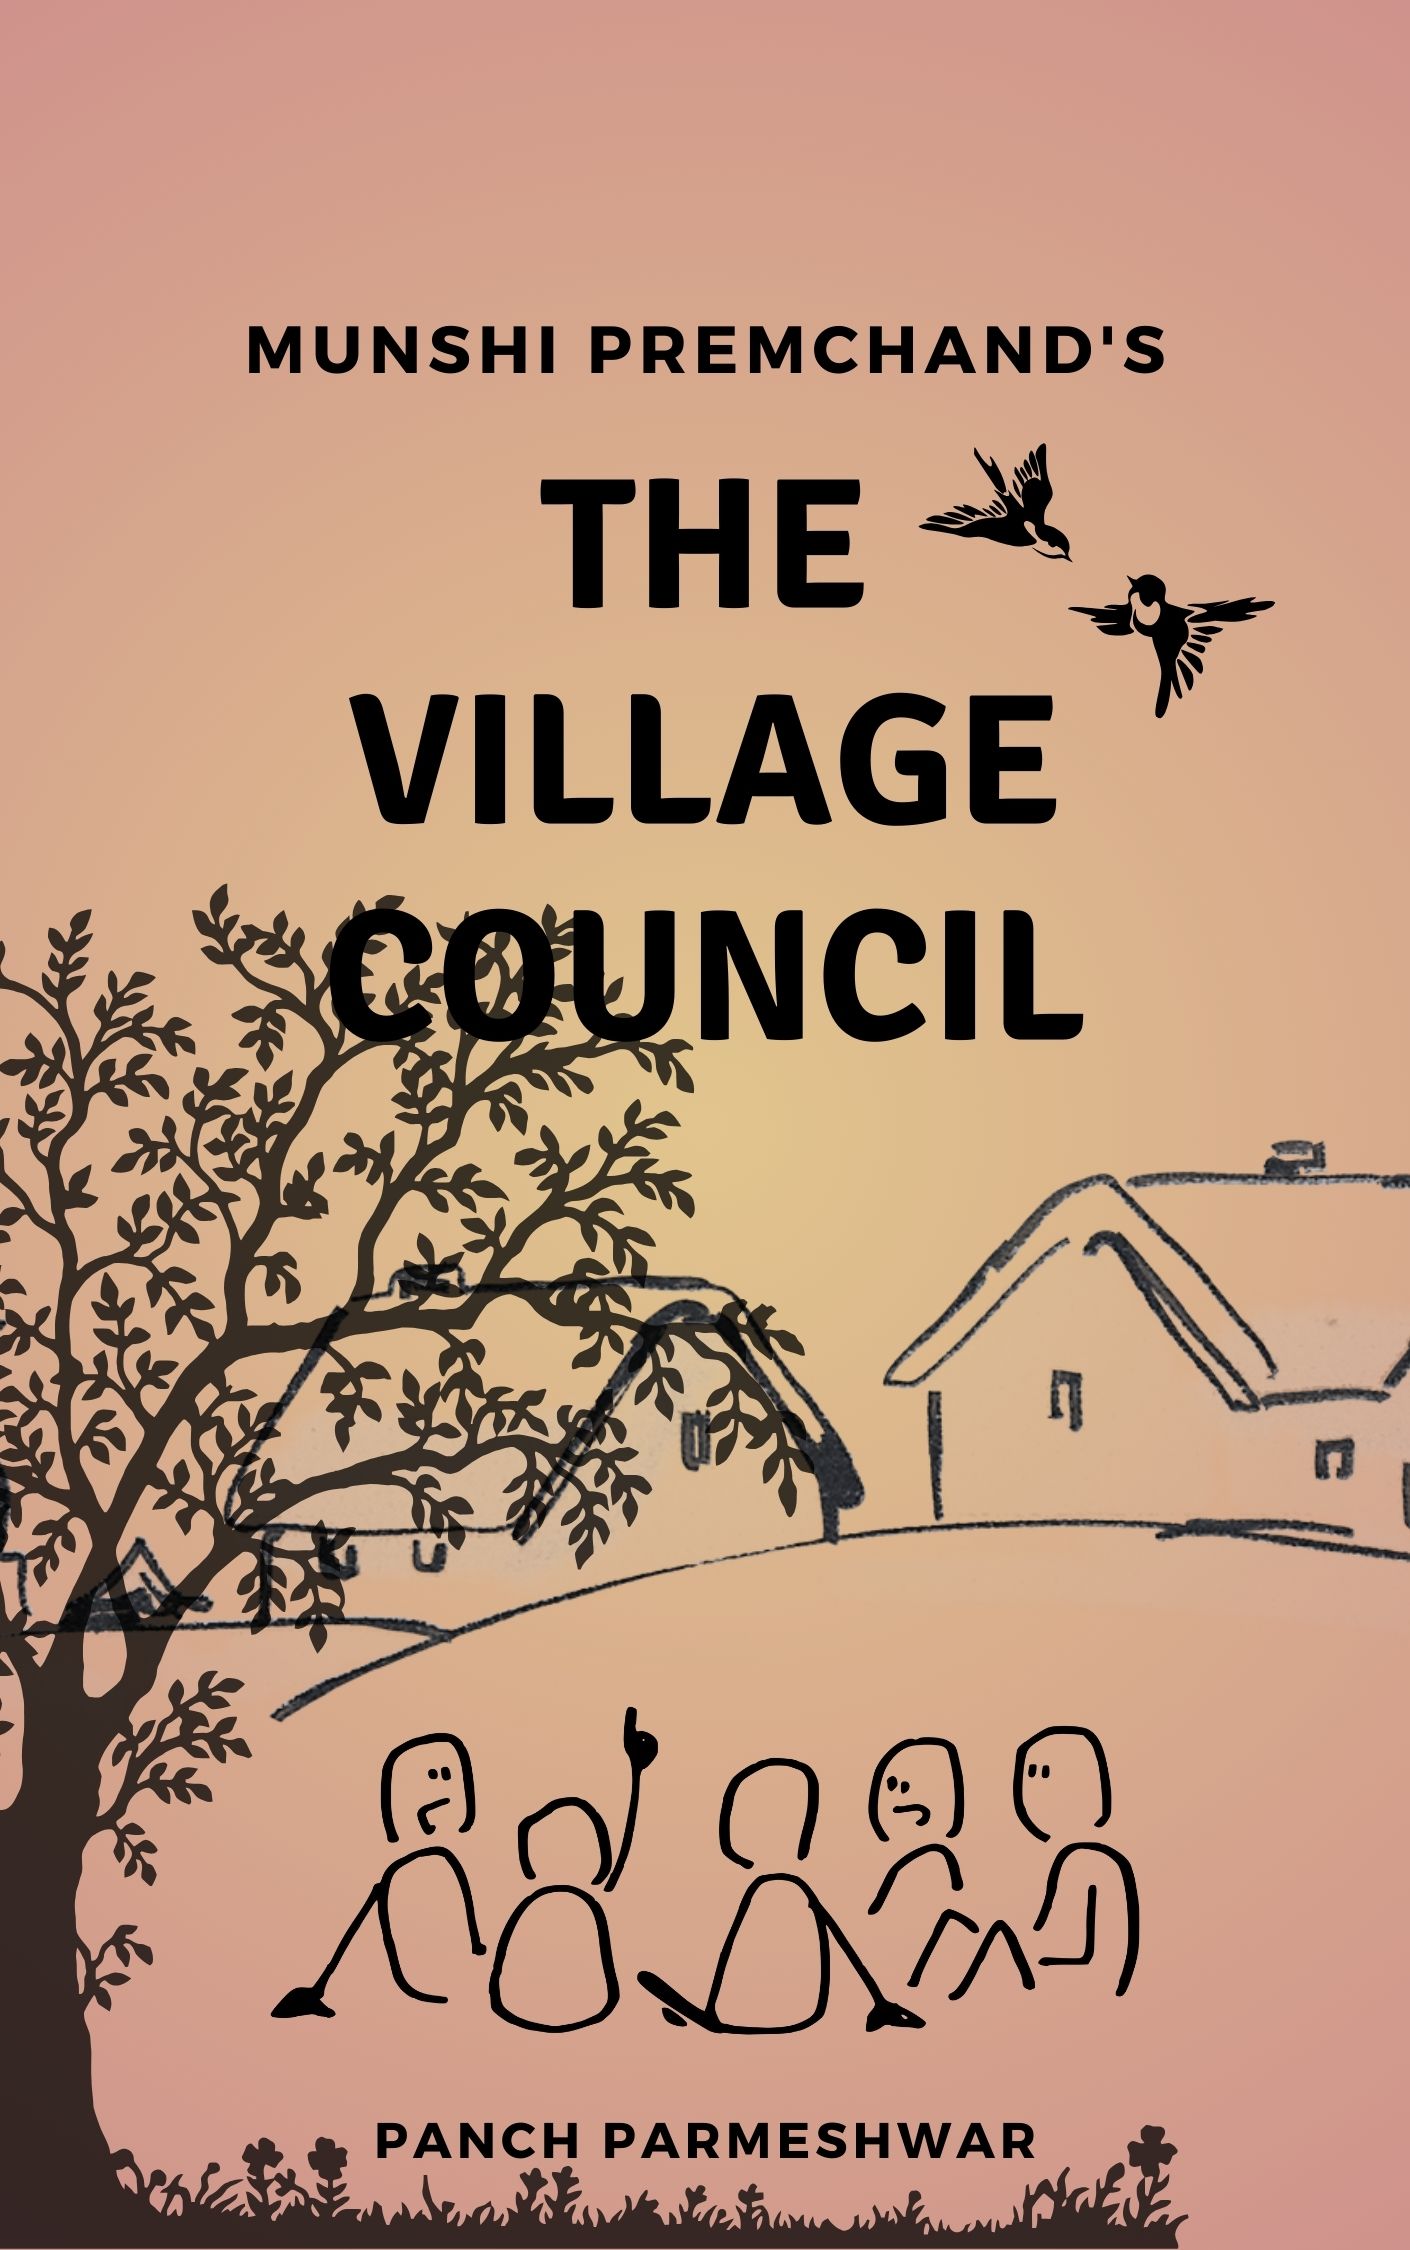 The Village Council by Munshi Premchand